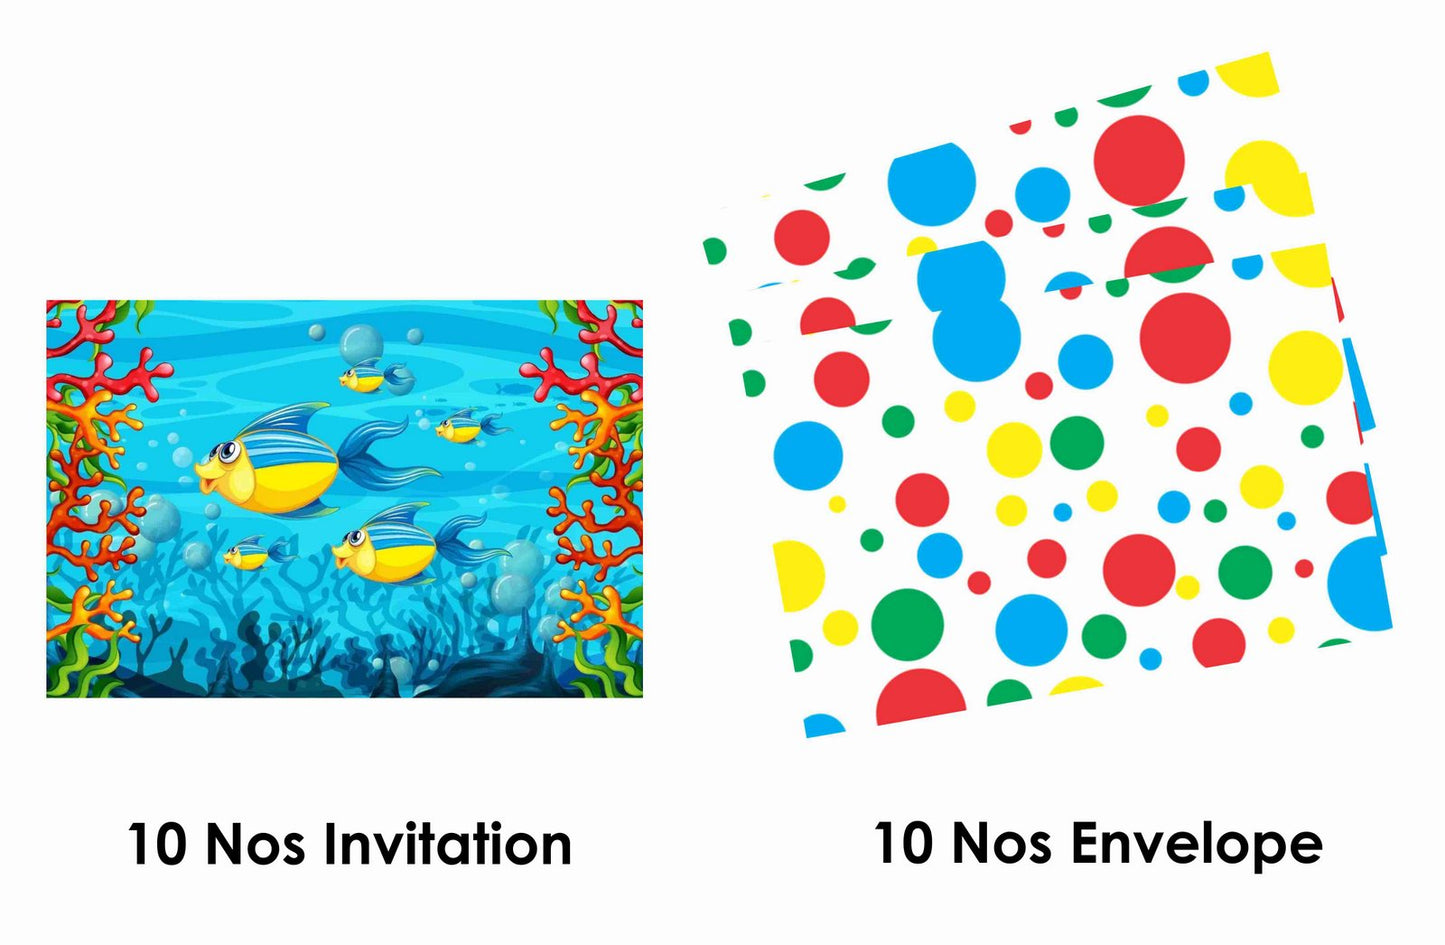 Ocean Underwater Theme Children's Birthday Party Invitations Cards with Envelopes - Kids Birthday Party Invitations for Boys or Girls,- Invitation Cards (Pack of 10)